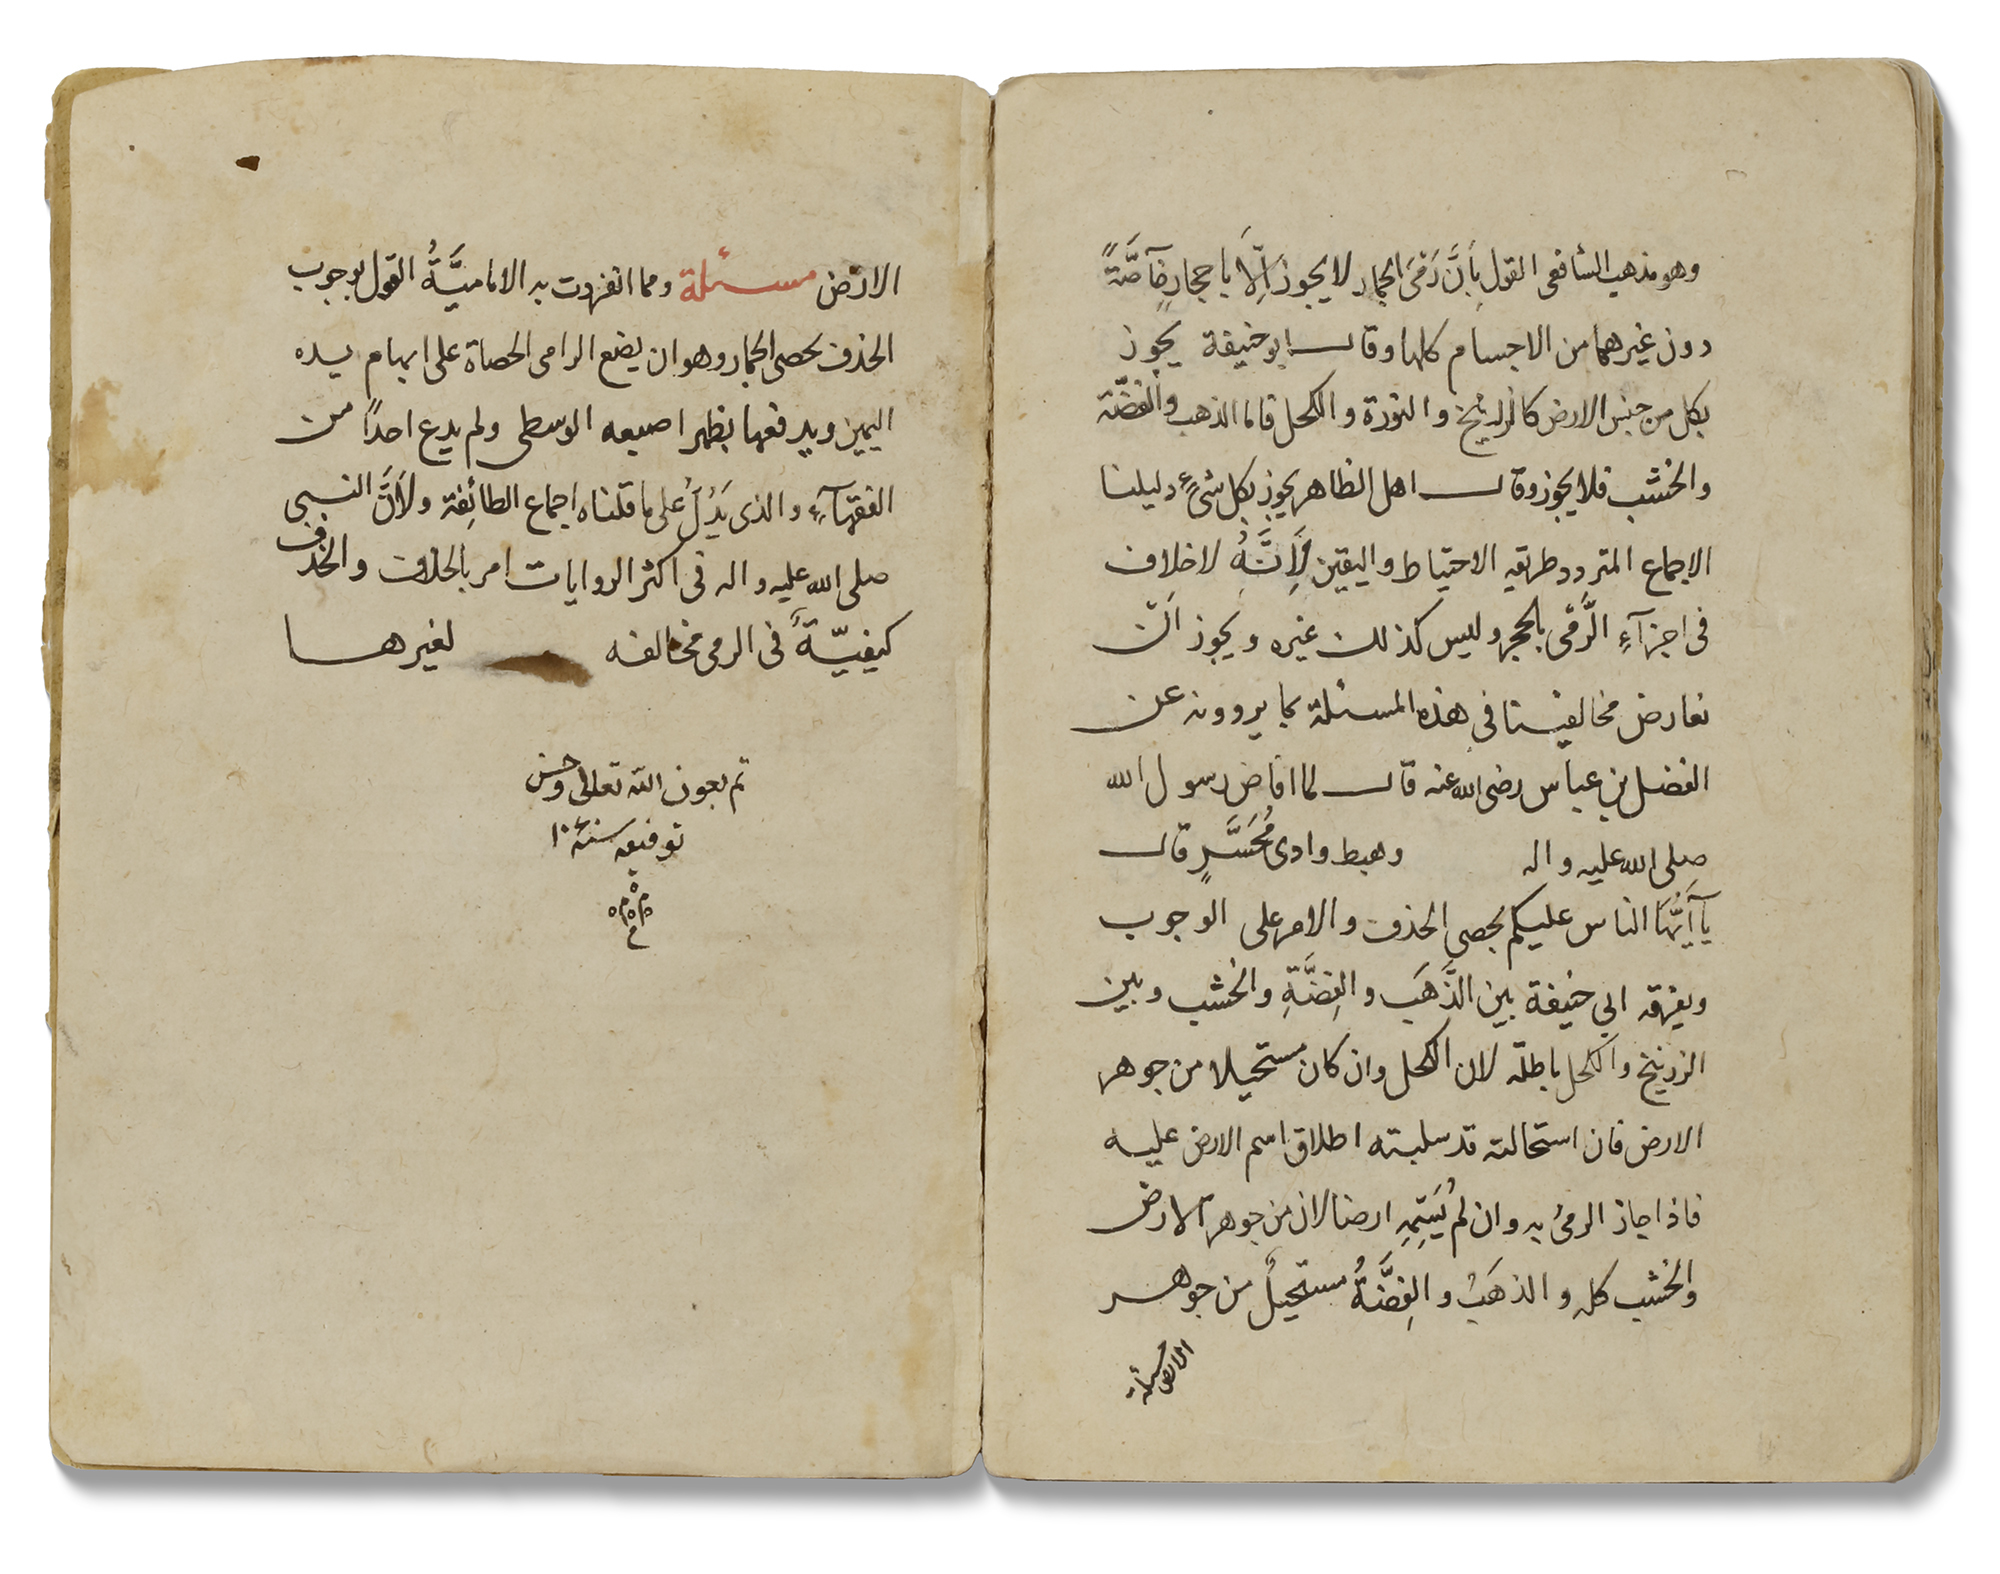 MIR ABUL FATAH IBN MIRZA MAKHDOOM AL-HUSAINI (D.974AH/ 1566AD), A TREATISE ON MATTERS CONCERNING THE - Image 5 of 8